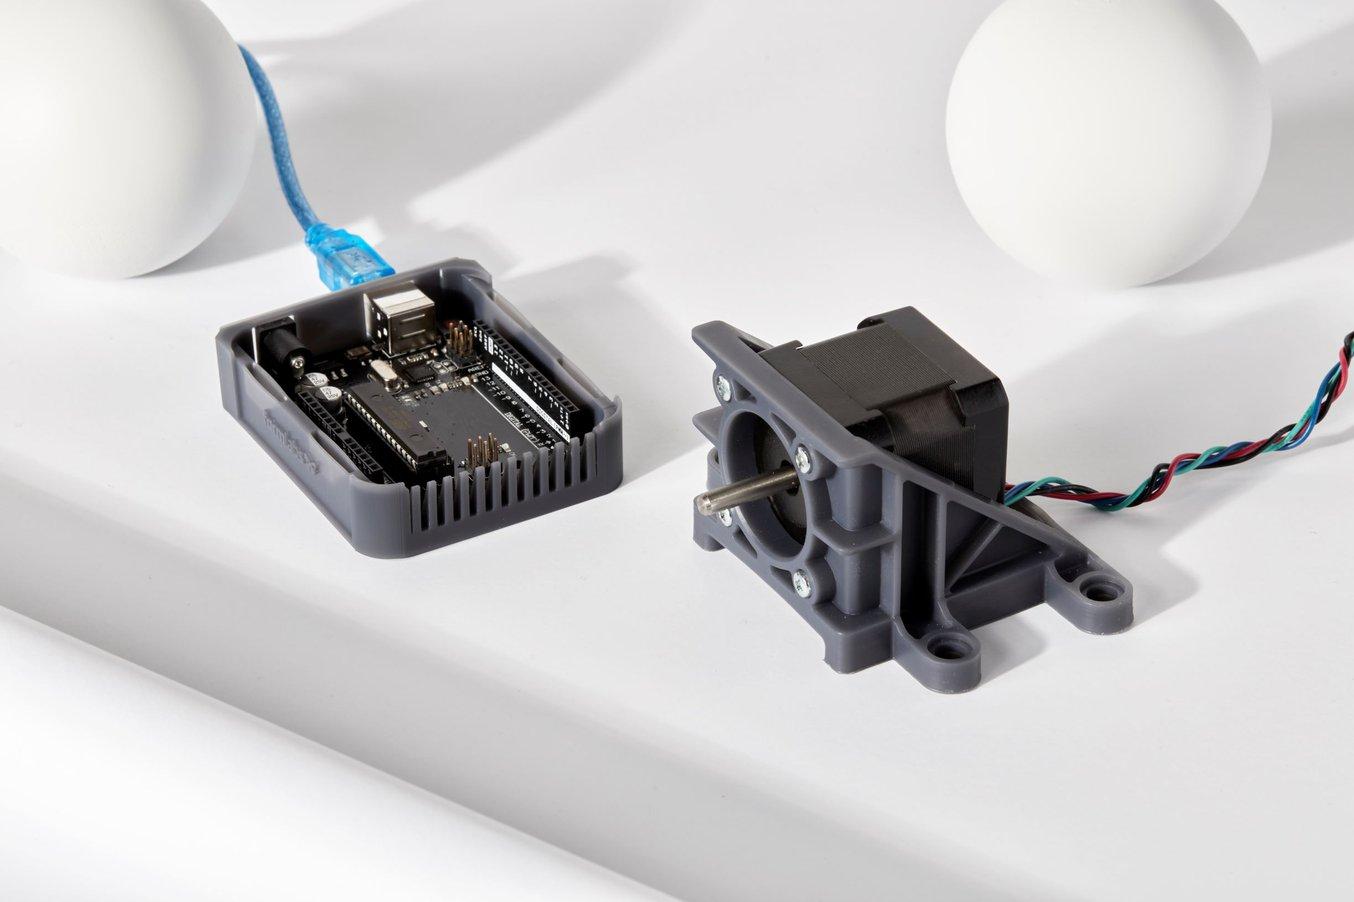 A electronic enclosure and motor housing made from Tough 2000 Resin